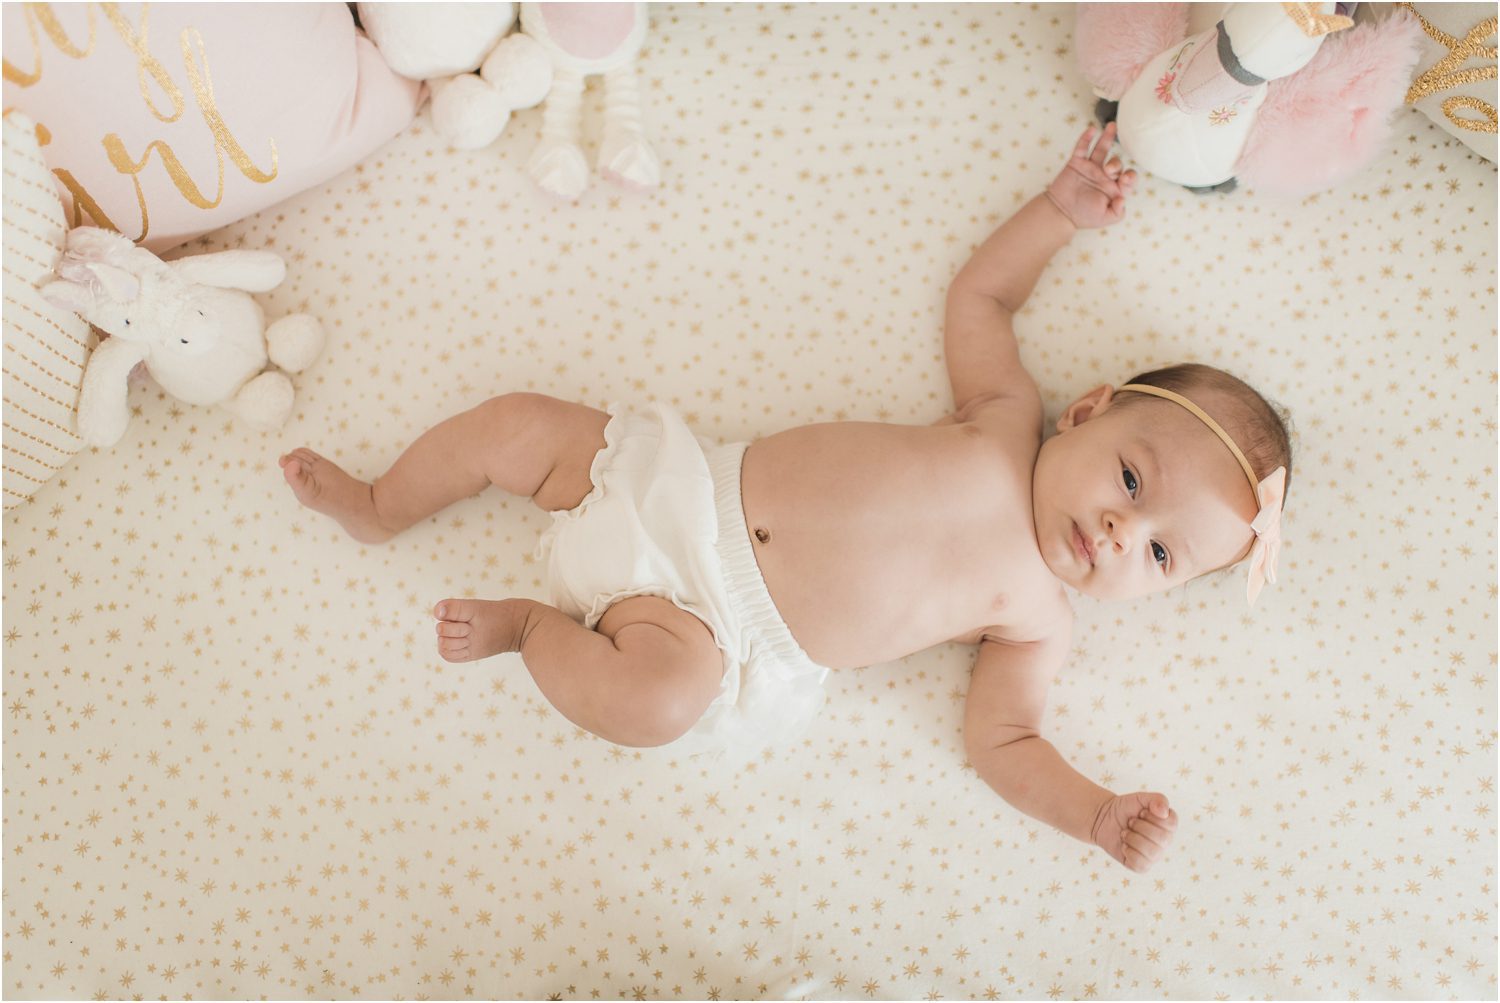 Fairy tale baby photography 0005